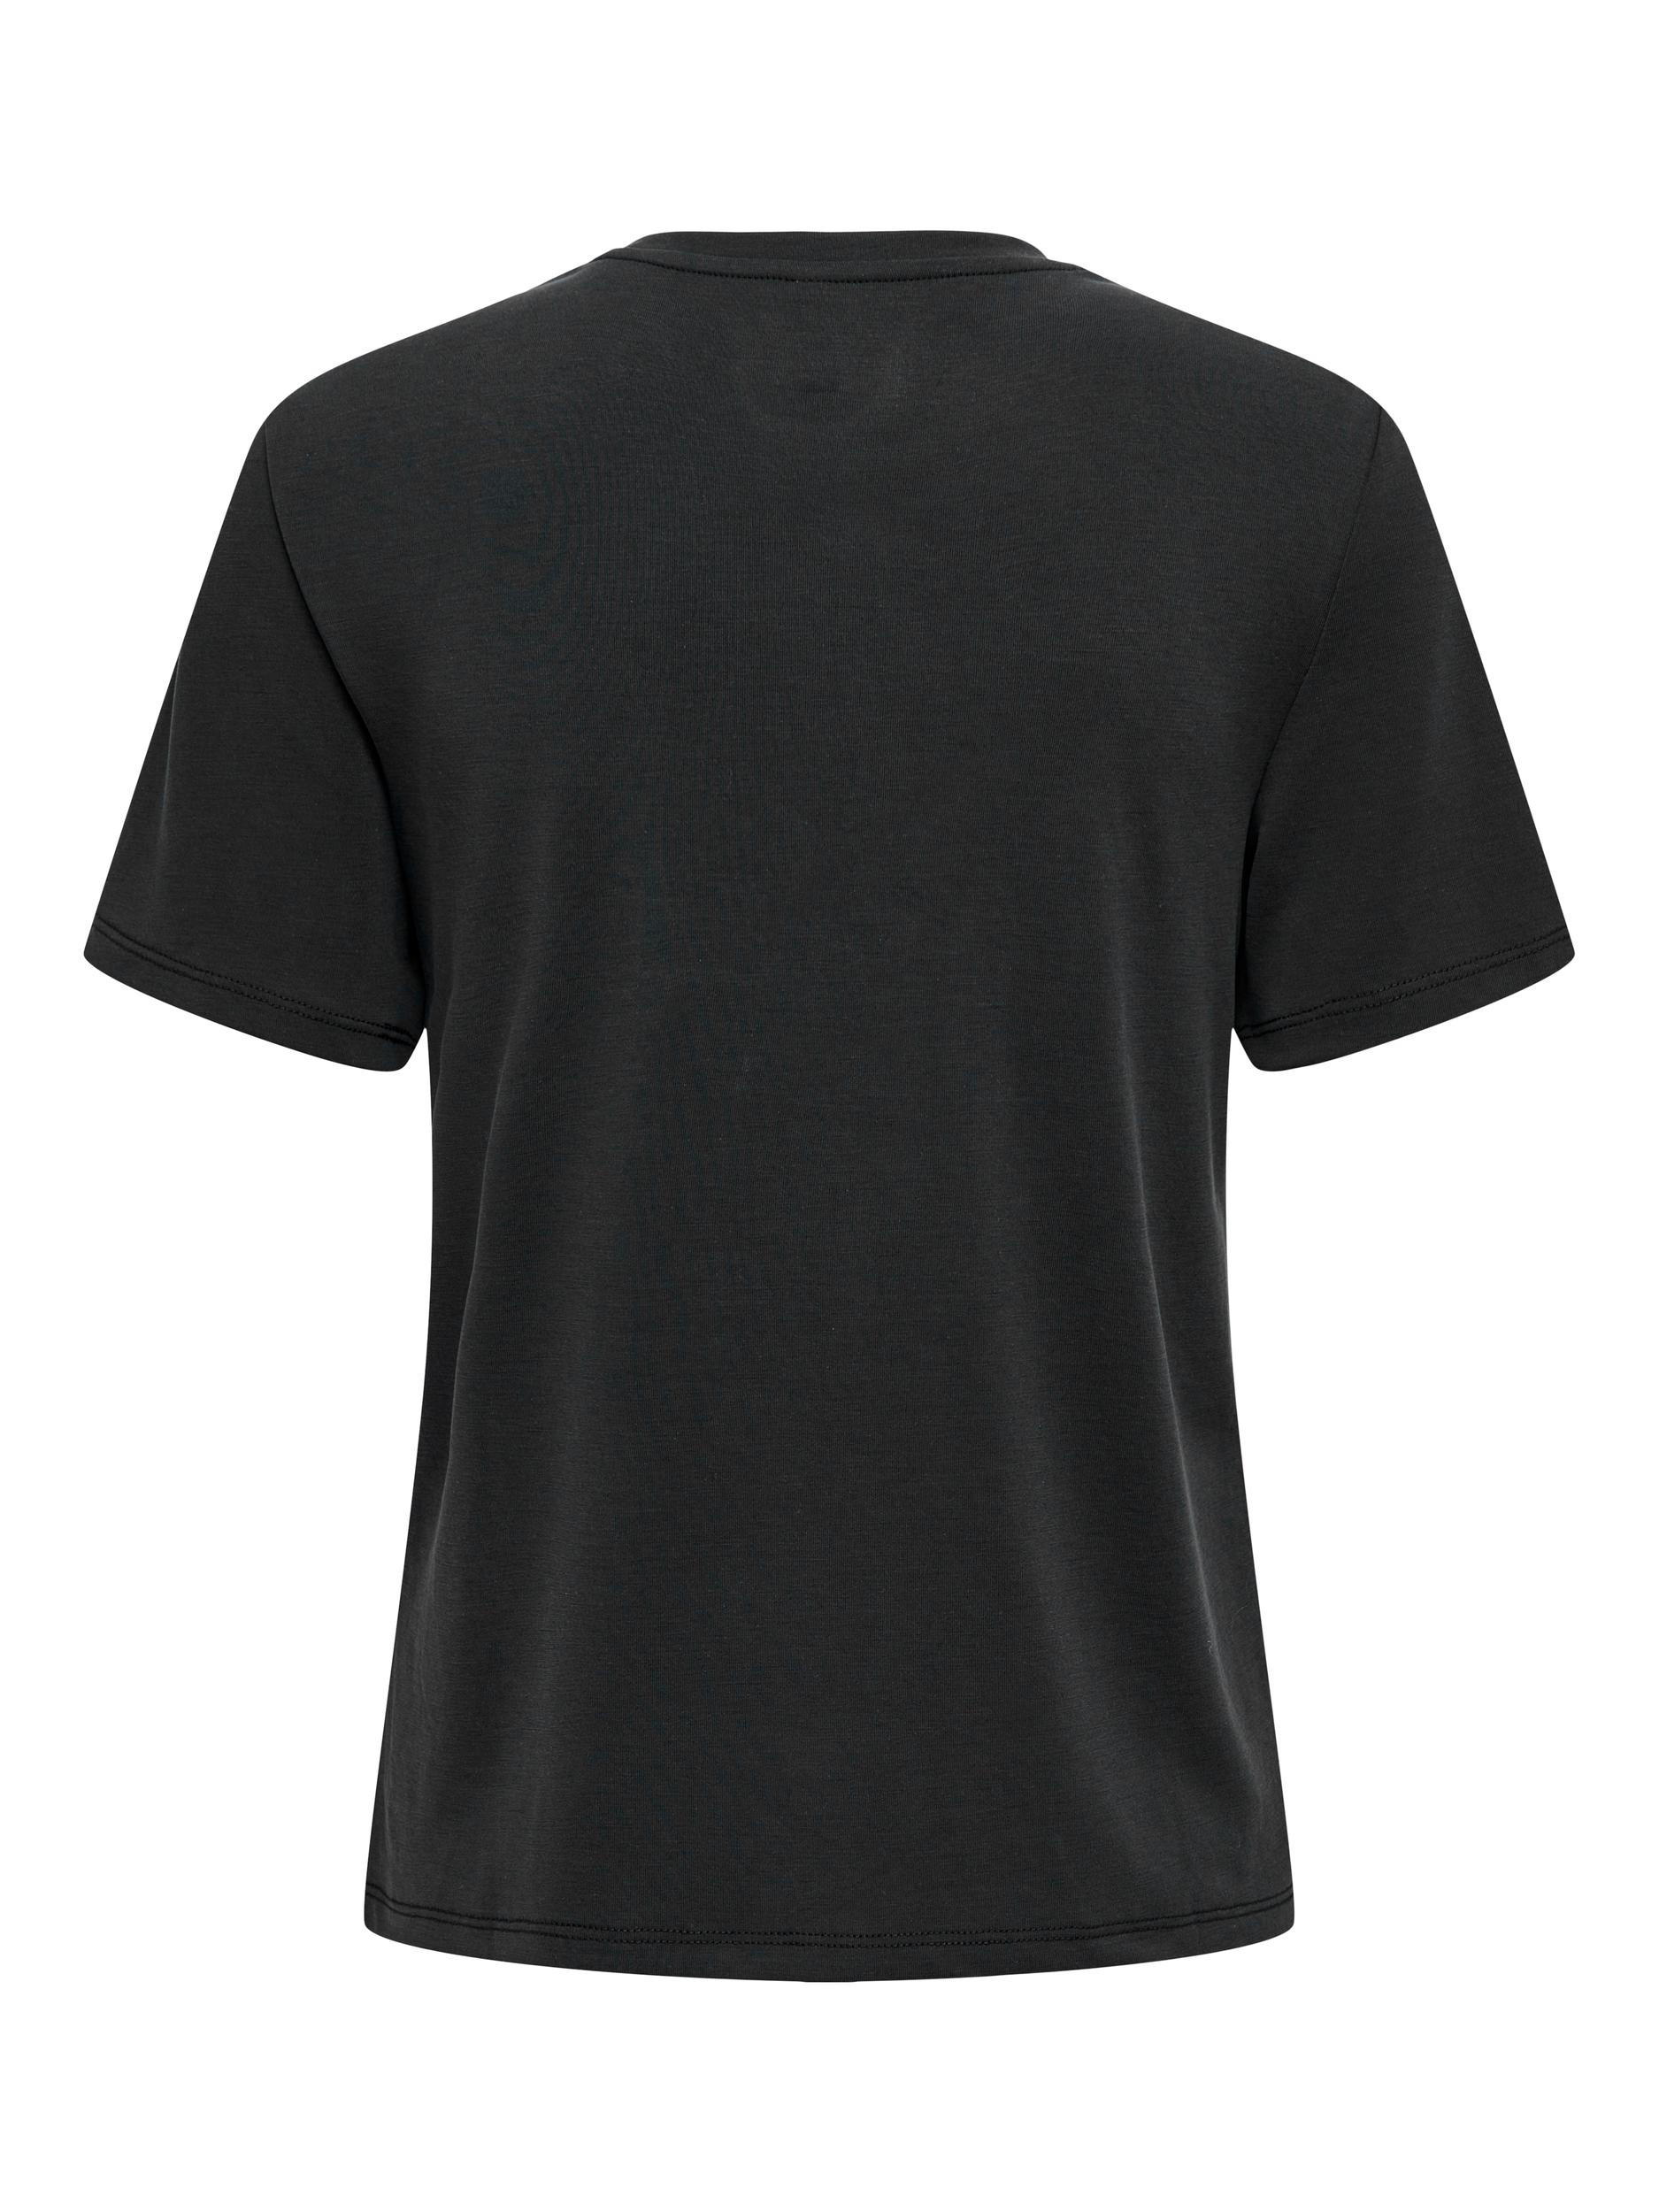 Only - Regular fit T-shirt with print, Black, large image number 1